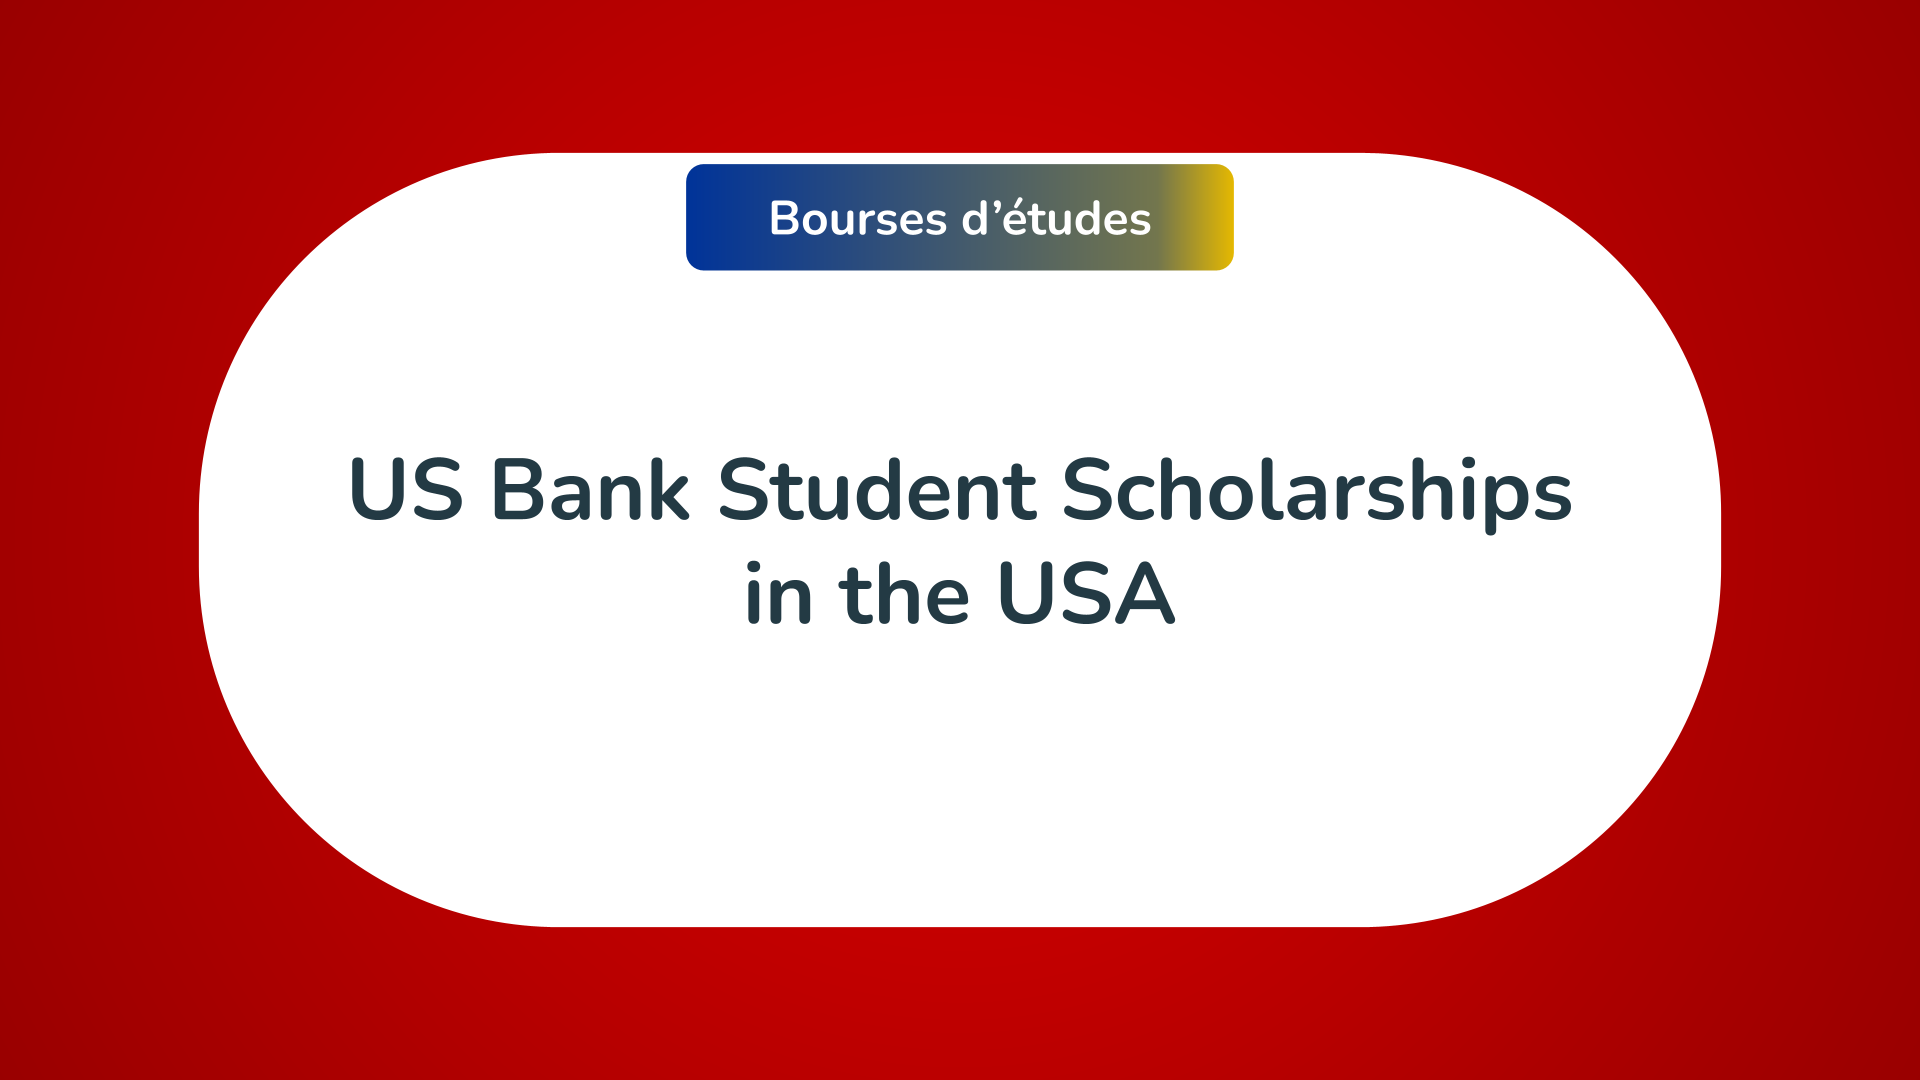 The 2 US Bank Student Scholarships in the USA in 2023